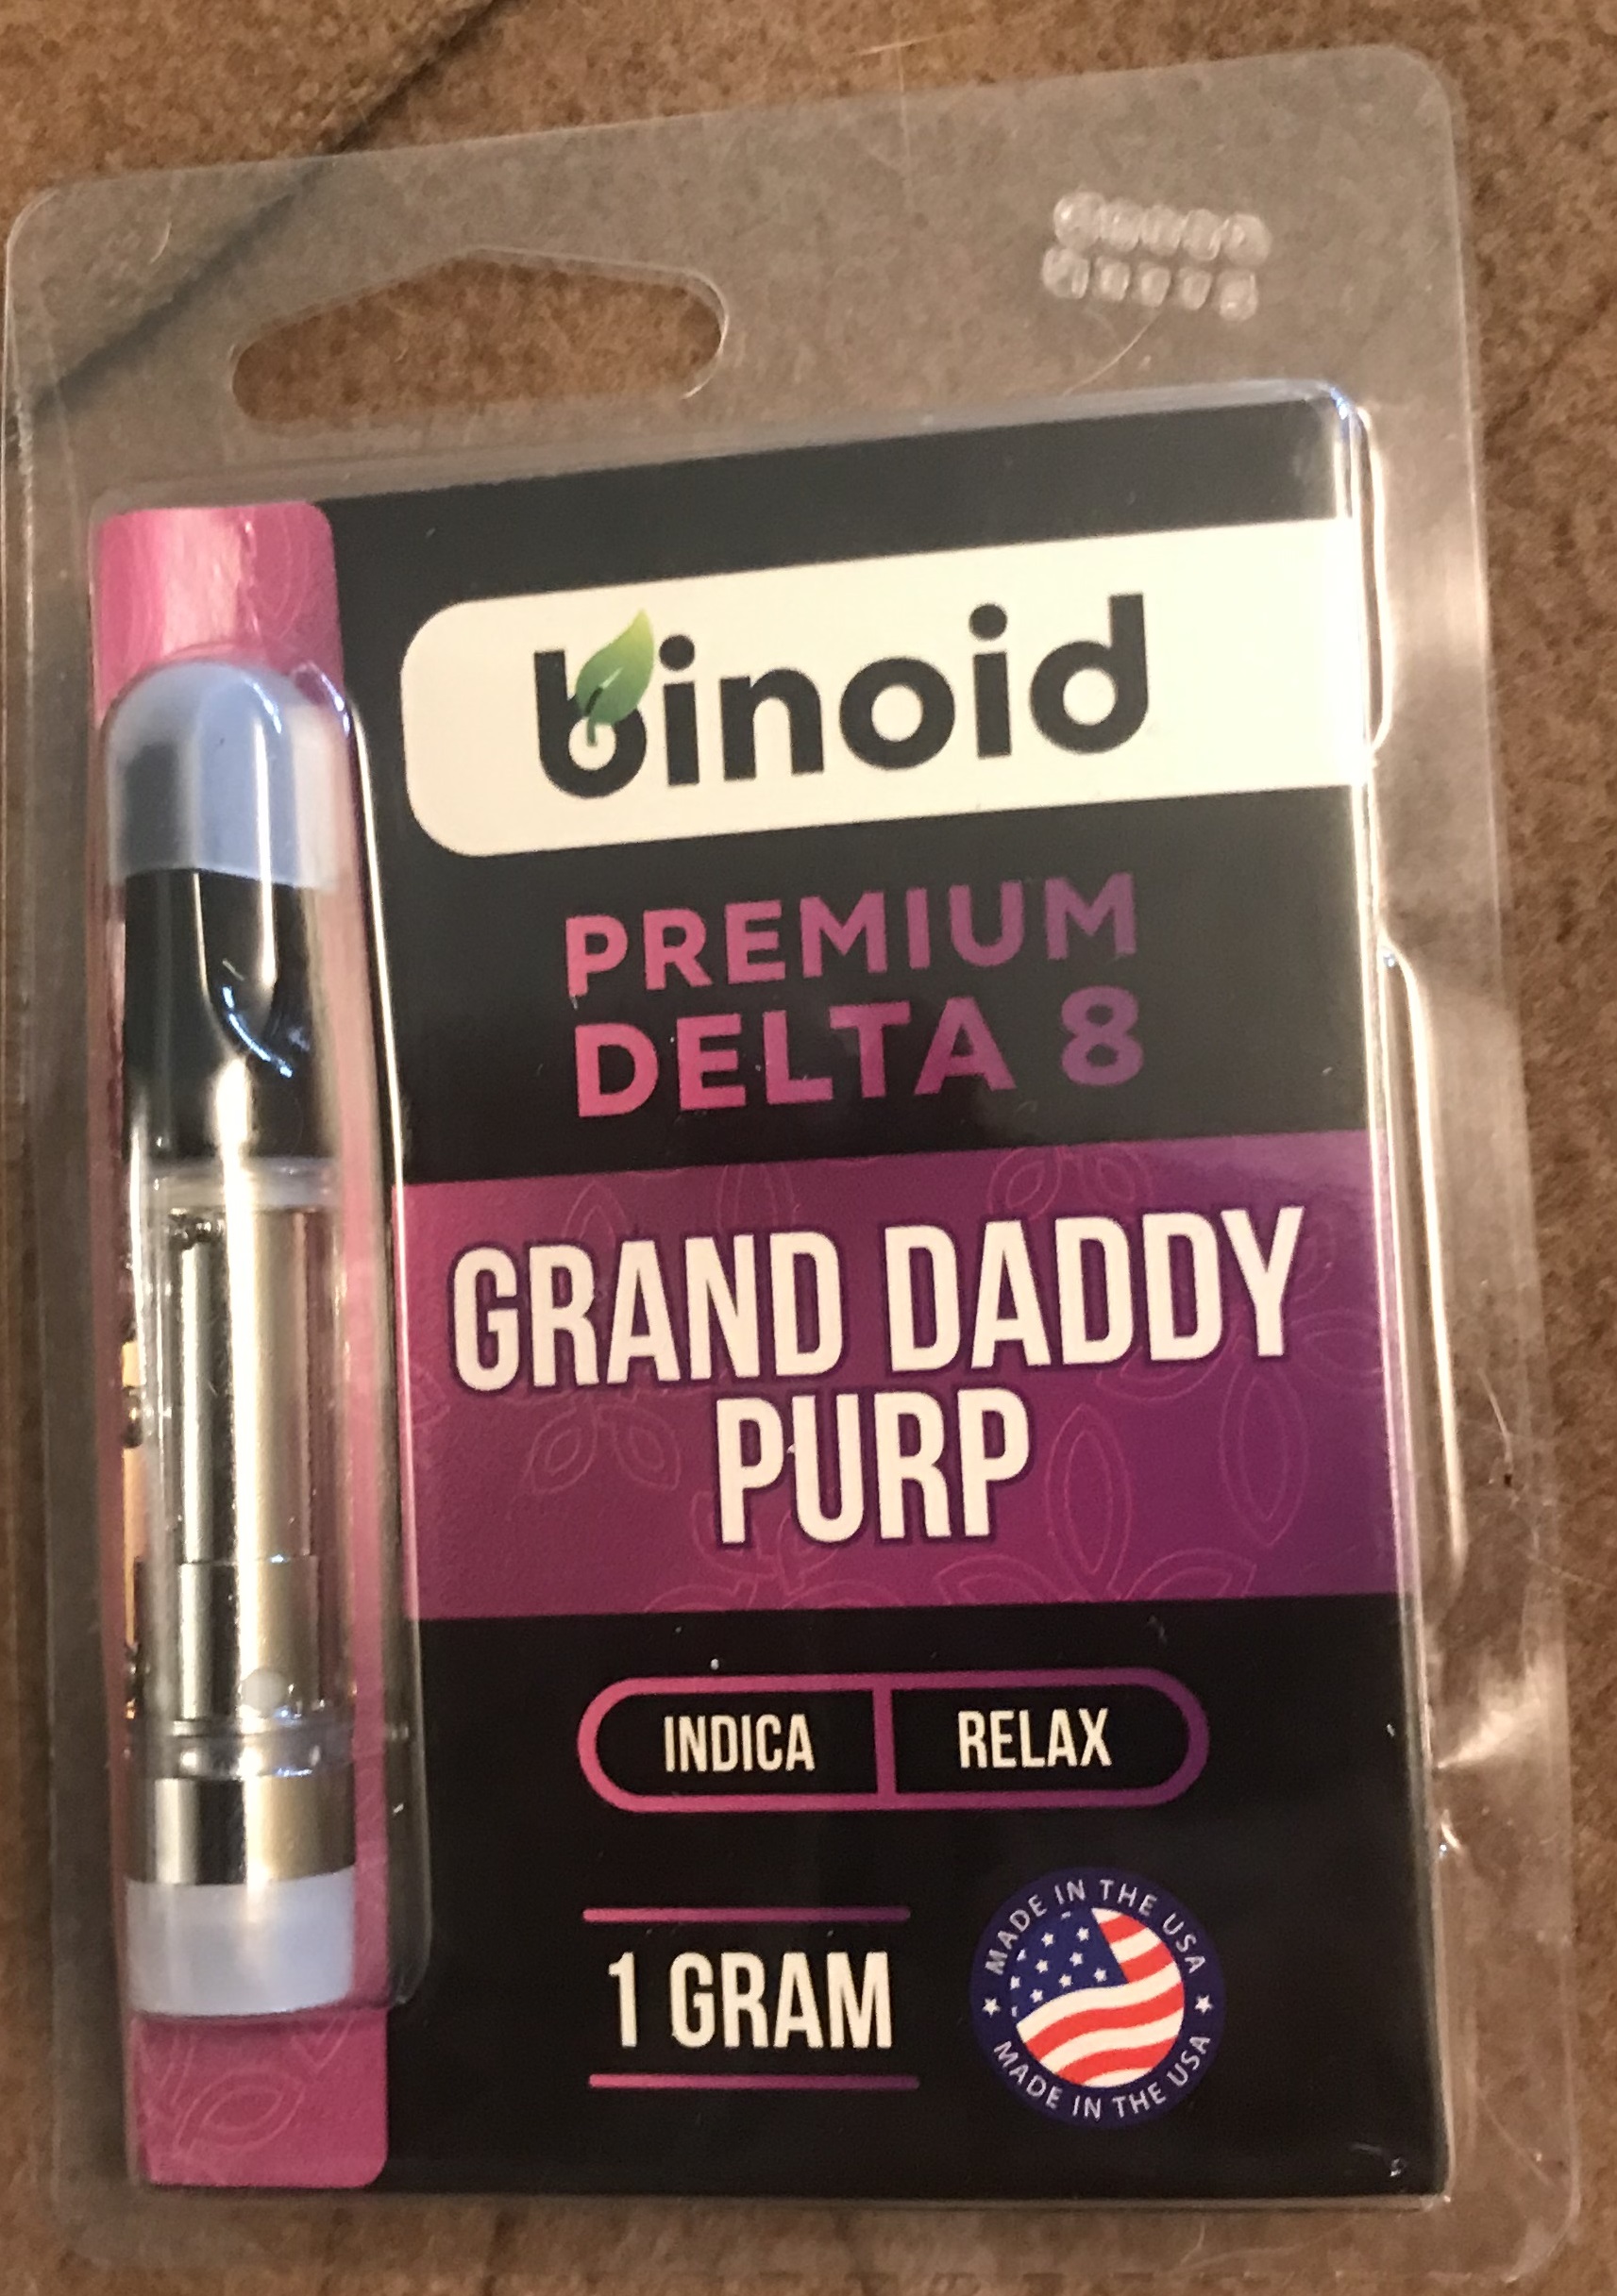 Delta 8 Color - Products|Thc|Hemp|Brand|Gummies|Product|Delta-8|Cbd|Origin|Cannabis|Delta|Users|Effects|Cartridges|Brands|Range|List|Research|Usasource|Options|Benefits|Plant|Companies|Vape|Source|Results|Gummy|People|Space|High-Quality|Quality|Place|Overview|Flowers|Lab|Drug|Cannabinoids|Tinctures|Overviewproducts|Cartridge|Delta-8 Thc|Delta-8 Products|Delta-9 Thc|Delta-8 Brands|Usa Source|Delta-8 Thc Products|Cannabis Plant|Federal Level|United States|Delta-8 Gummies|Delta-8 Space|Health Canada|Delta Products|Delta-8 Thc Gummies|Delta-8 Companies|Vape Cartridges|Similar Benefits|Hemp Doctor|Brand Overviewproducts|Drug Test|High-Quality Products|Organic Hemp|San Jose|Editorial Team|Farm Bill|Overview Products|Wide Range|Psychoactive Properties|Reliable Provider|Boston Hempire